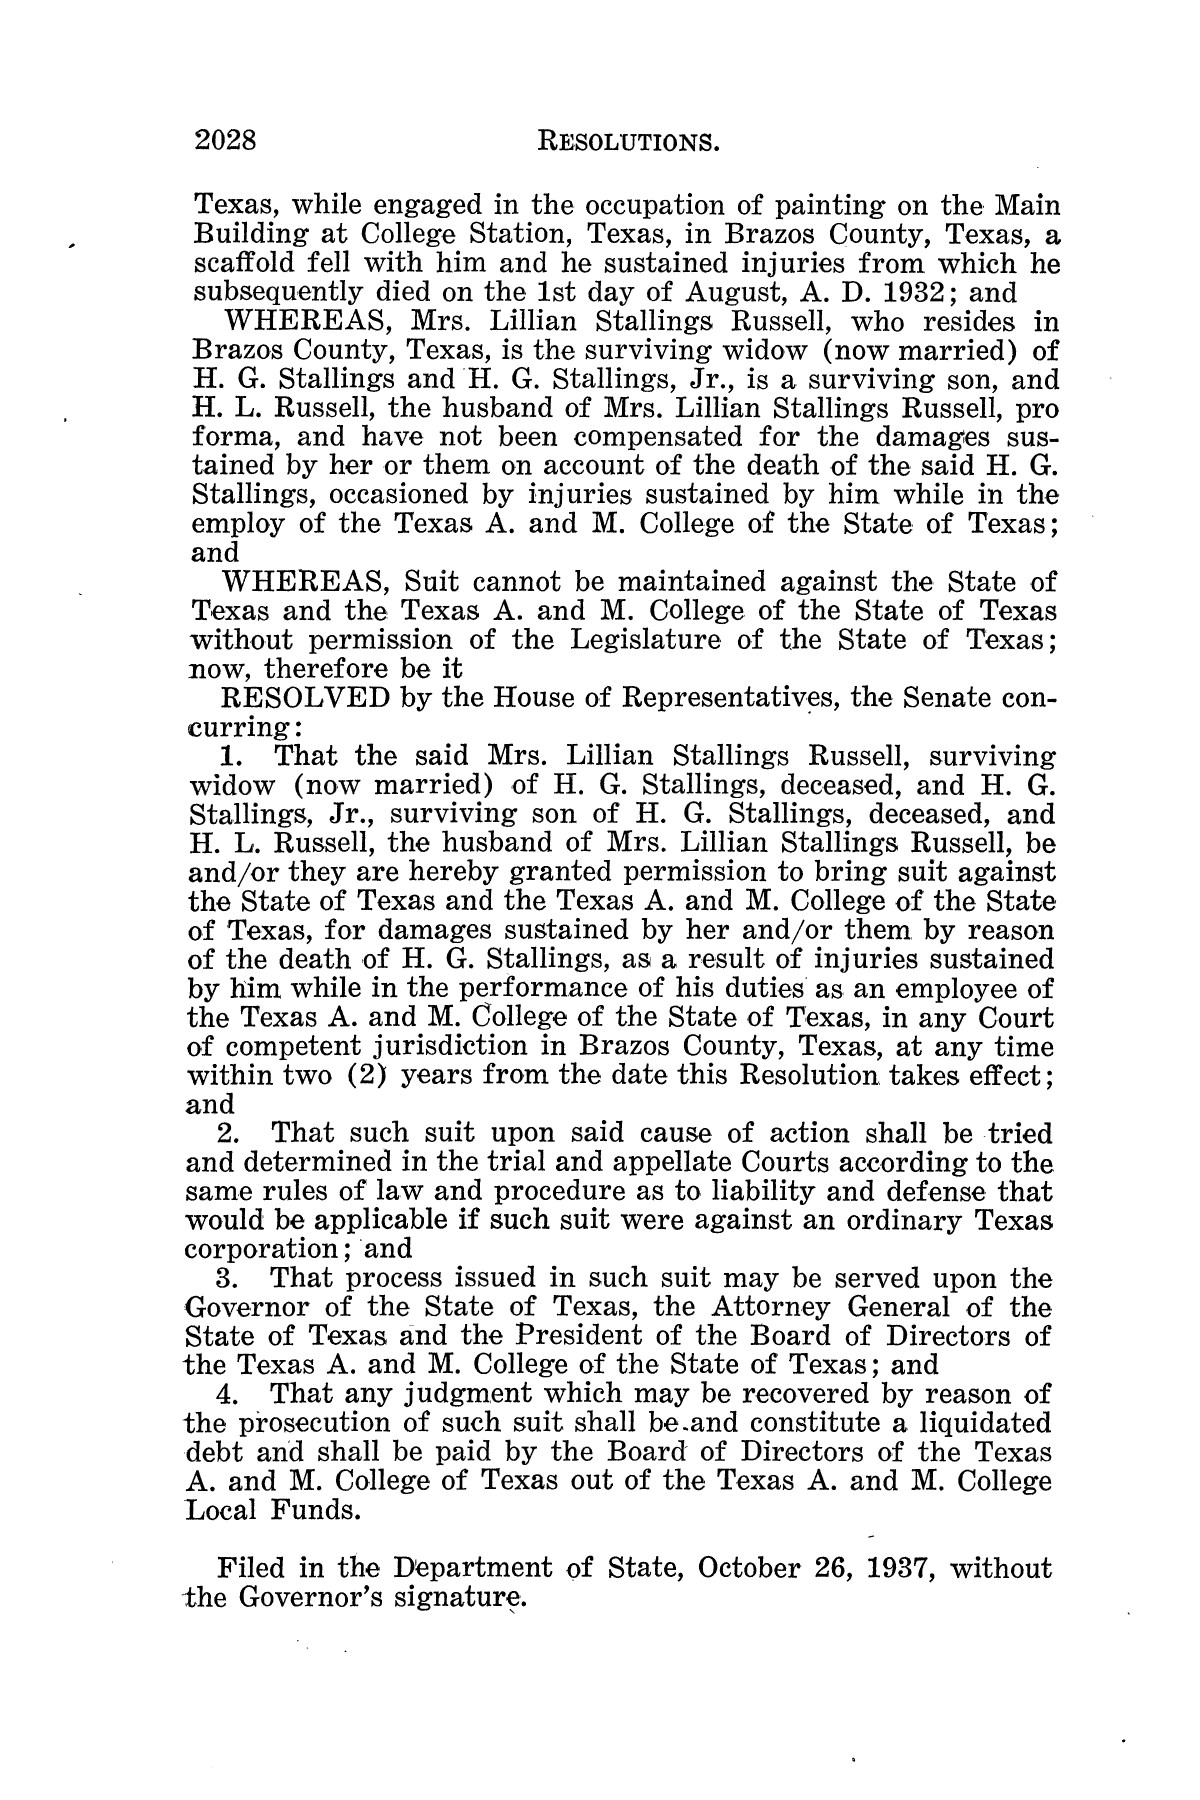 The Laws of Texas, 1937-1939 [Volume 31]
                                                
                                                    [Sequence #]: 306 of 1313
                                                